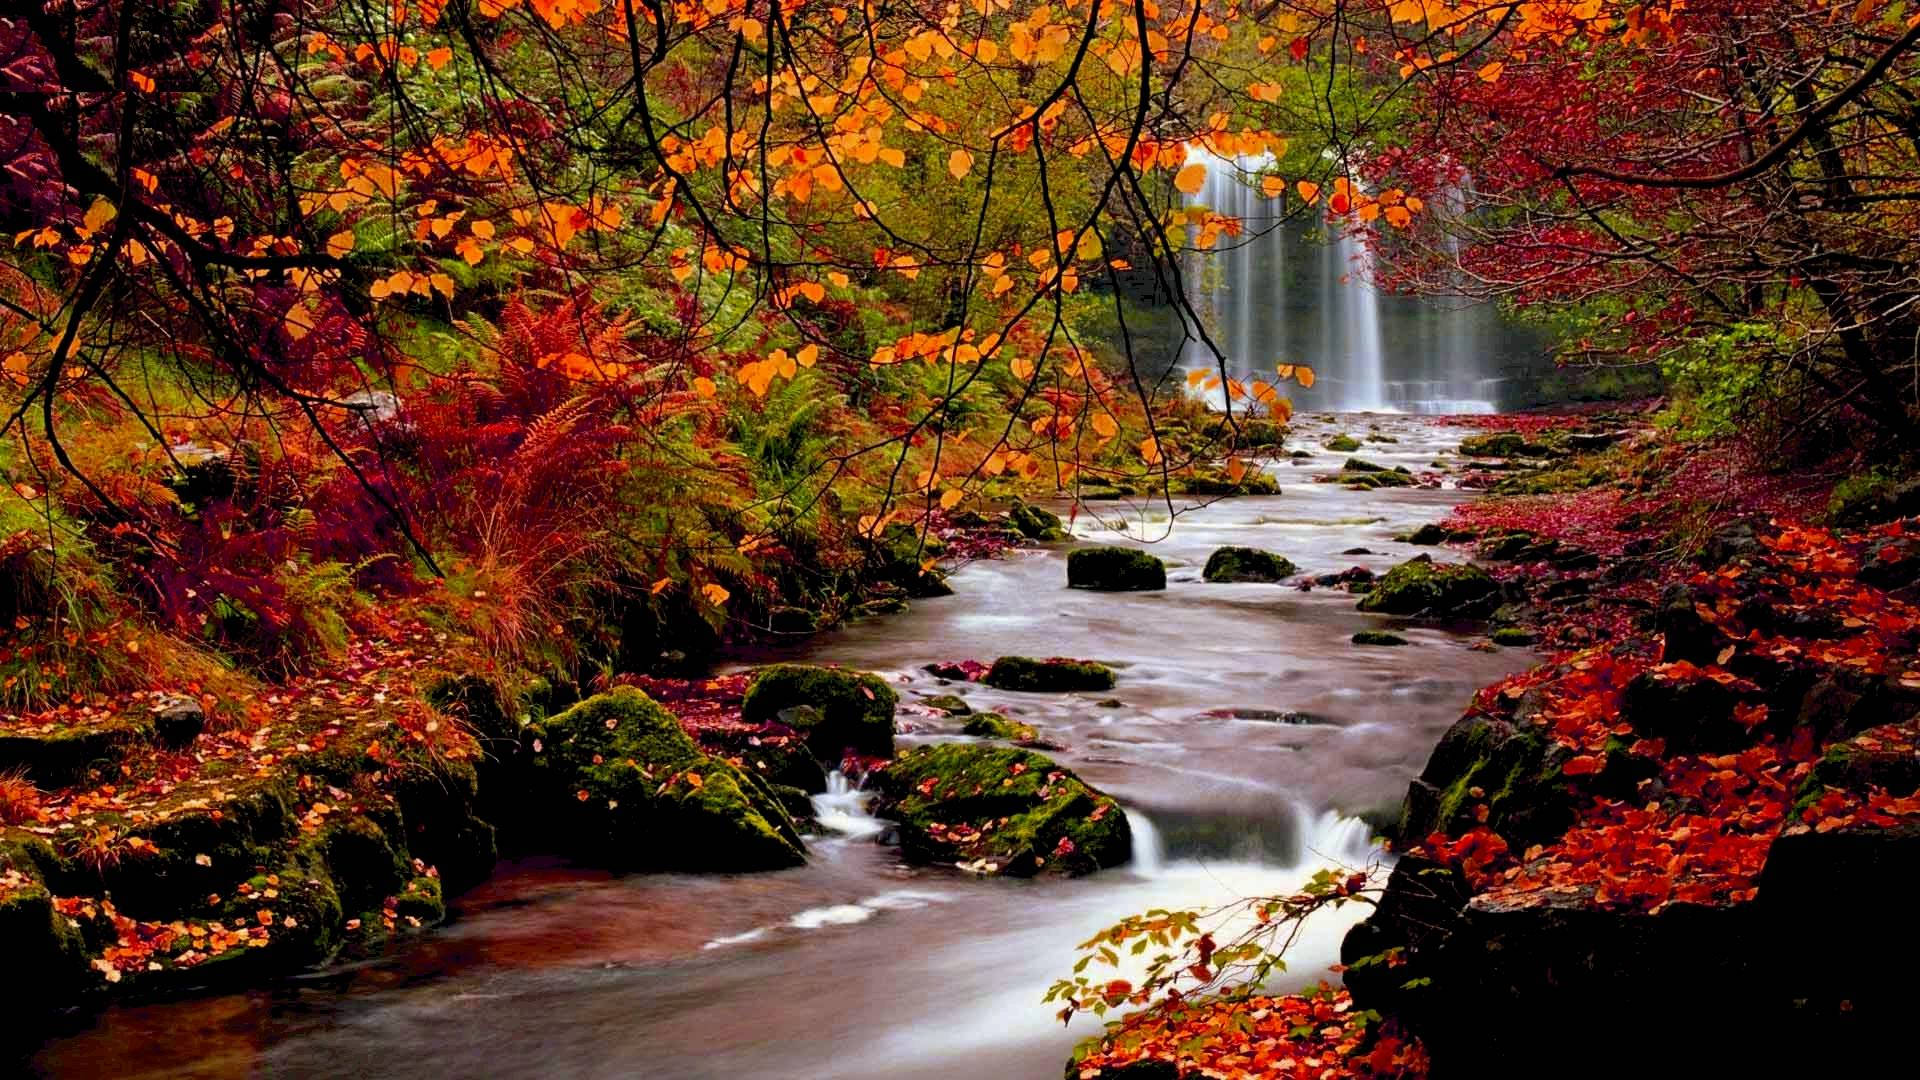 Autumn Landscape With Colorful Maple Trees And Waterfalls